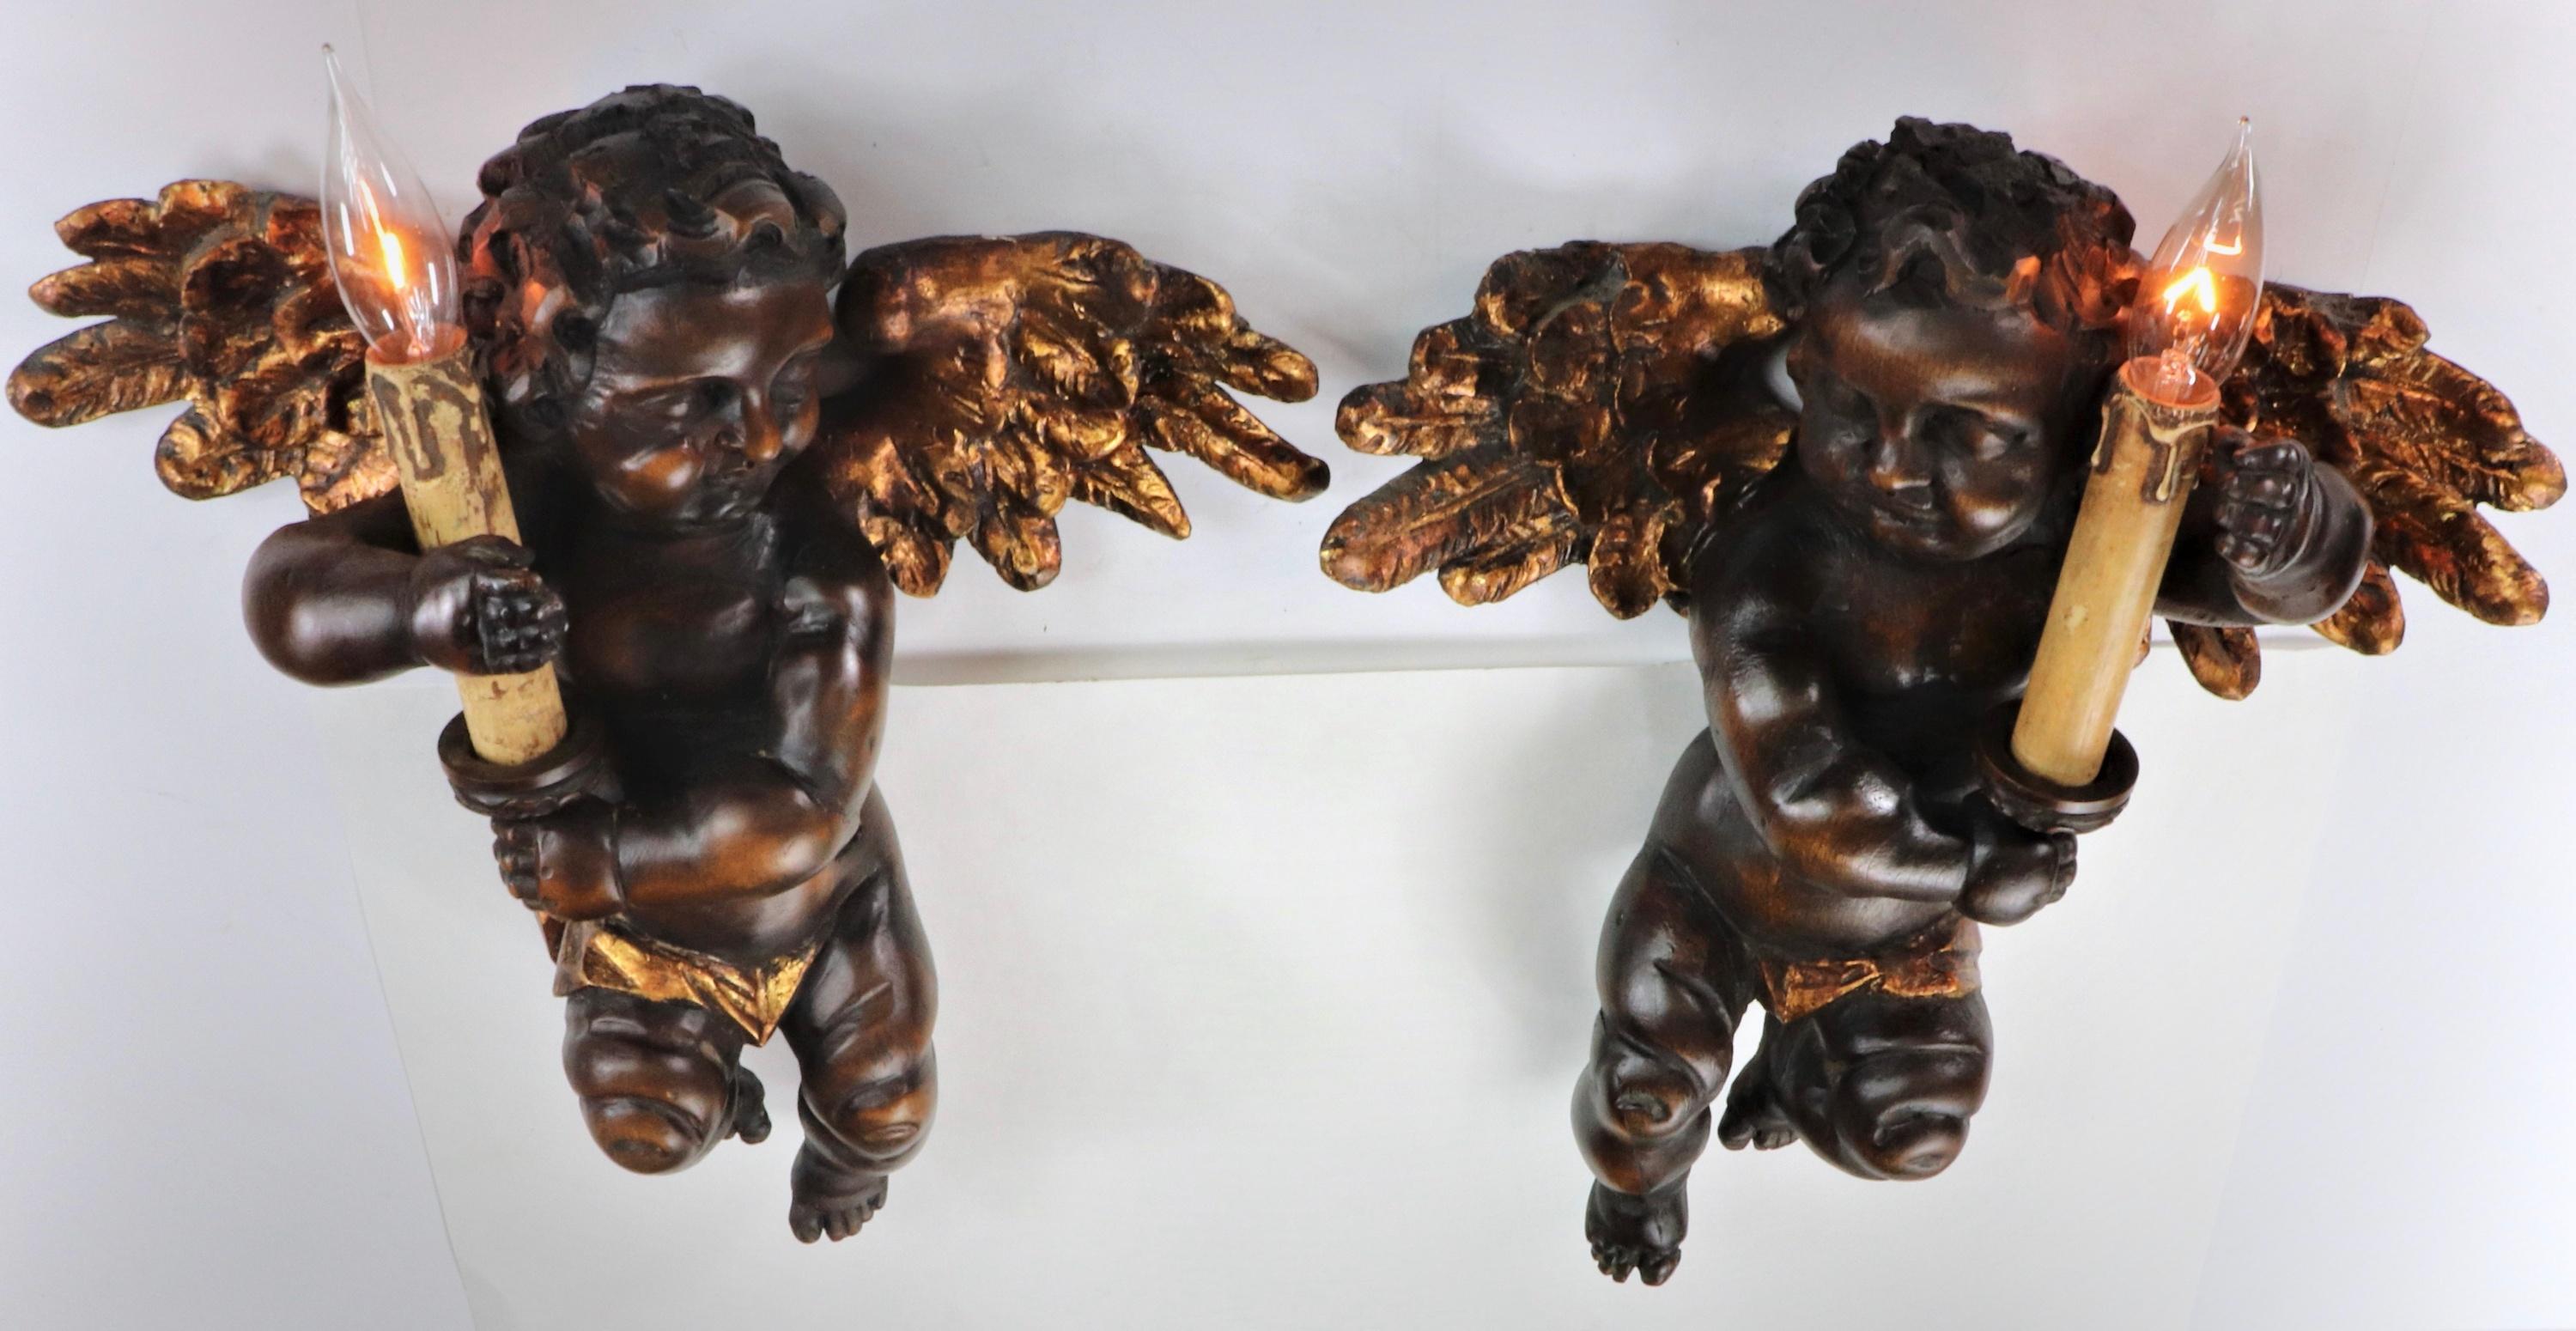 These excellently hand-carved wooden 19th Century Italian angel cherub sconces were done in the traditional Renaissance style. During the Renaissance period, cherub and angel figural carvings were quite popular. The Italian artist, Raphael created